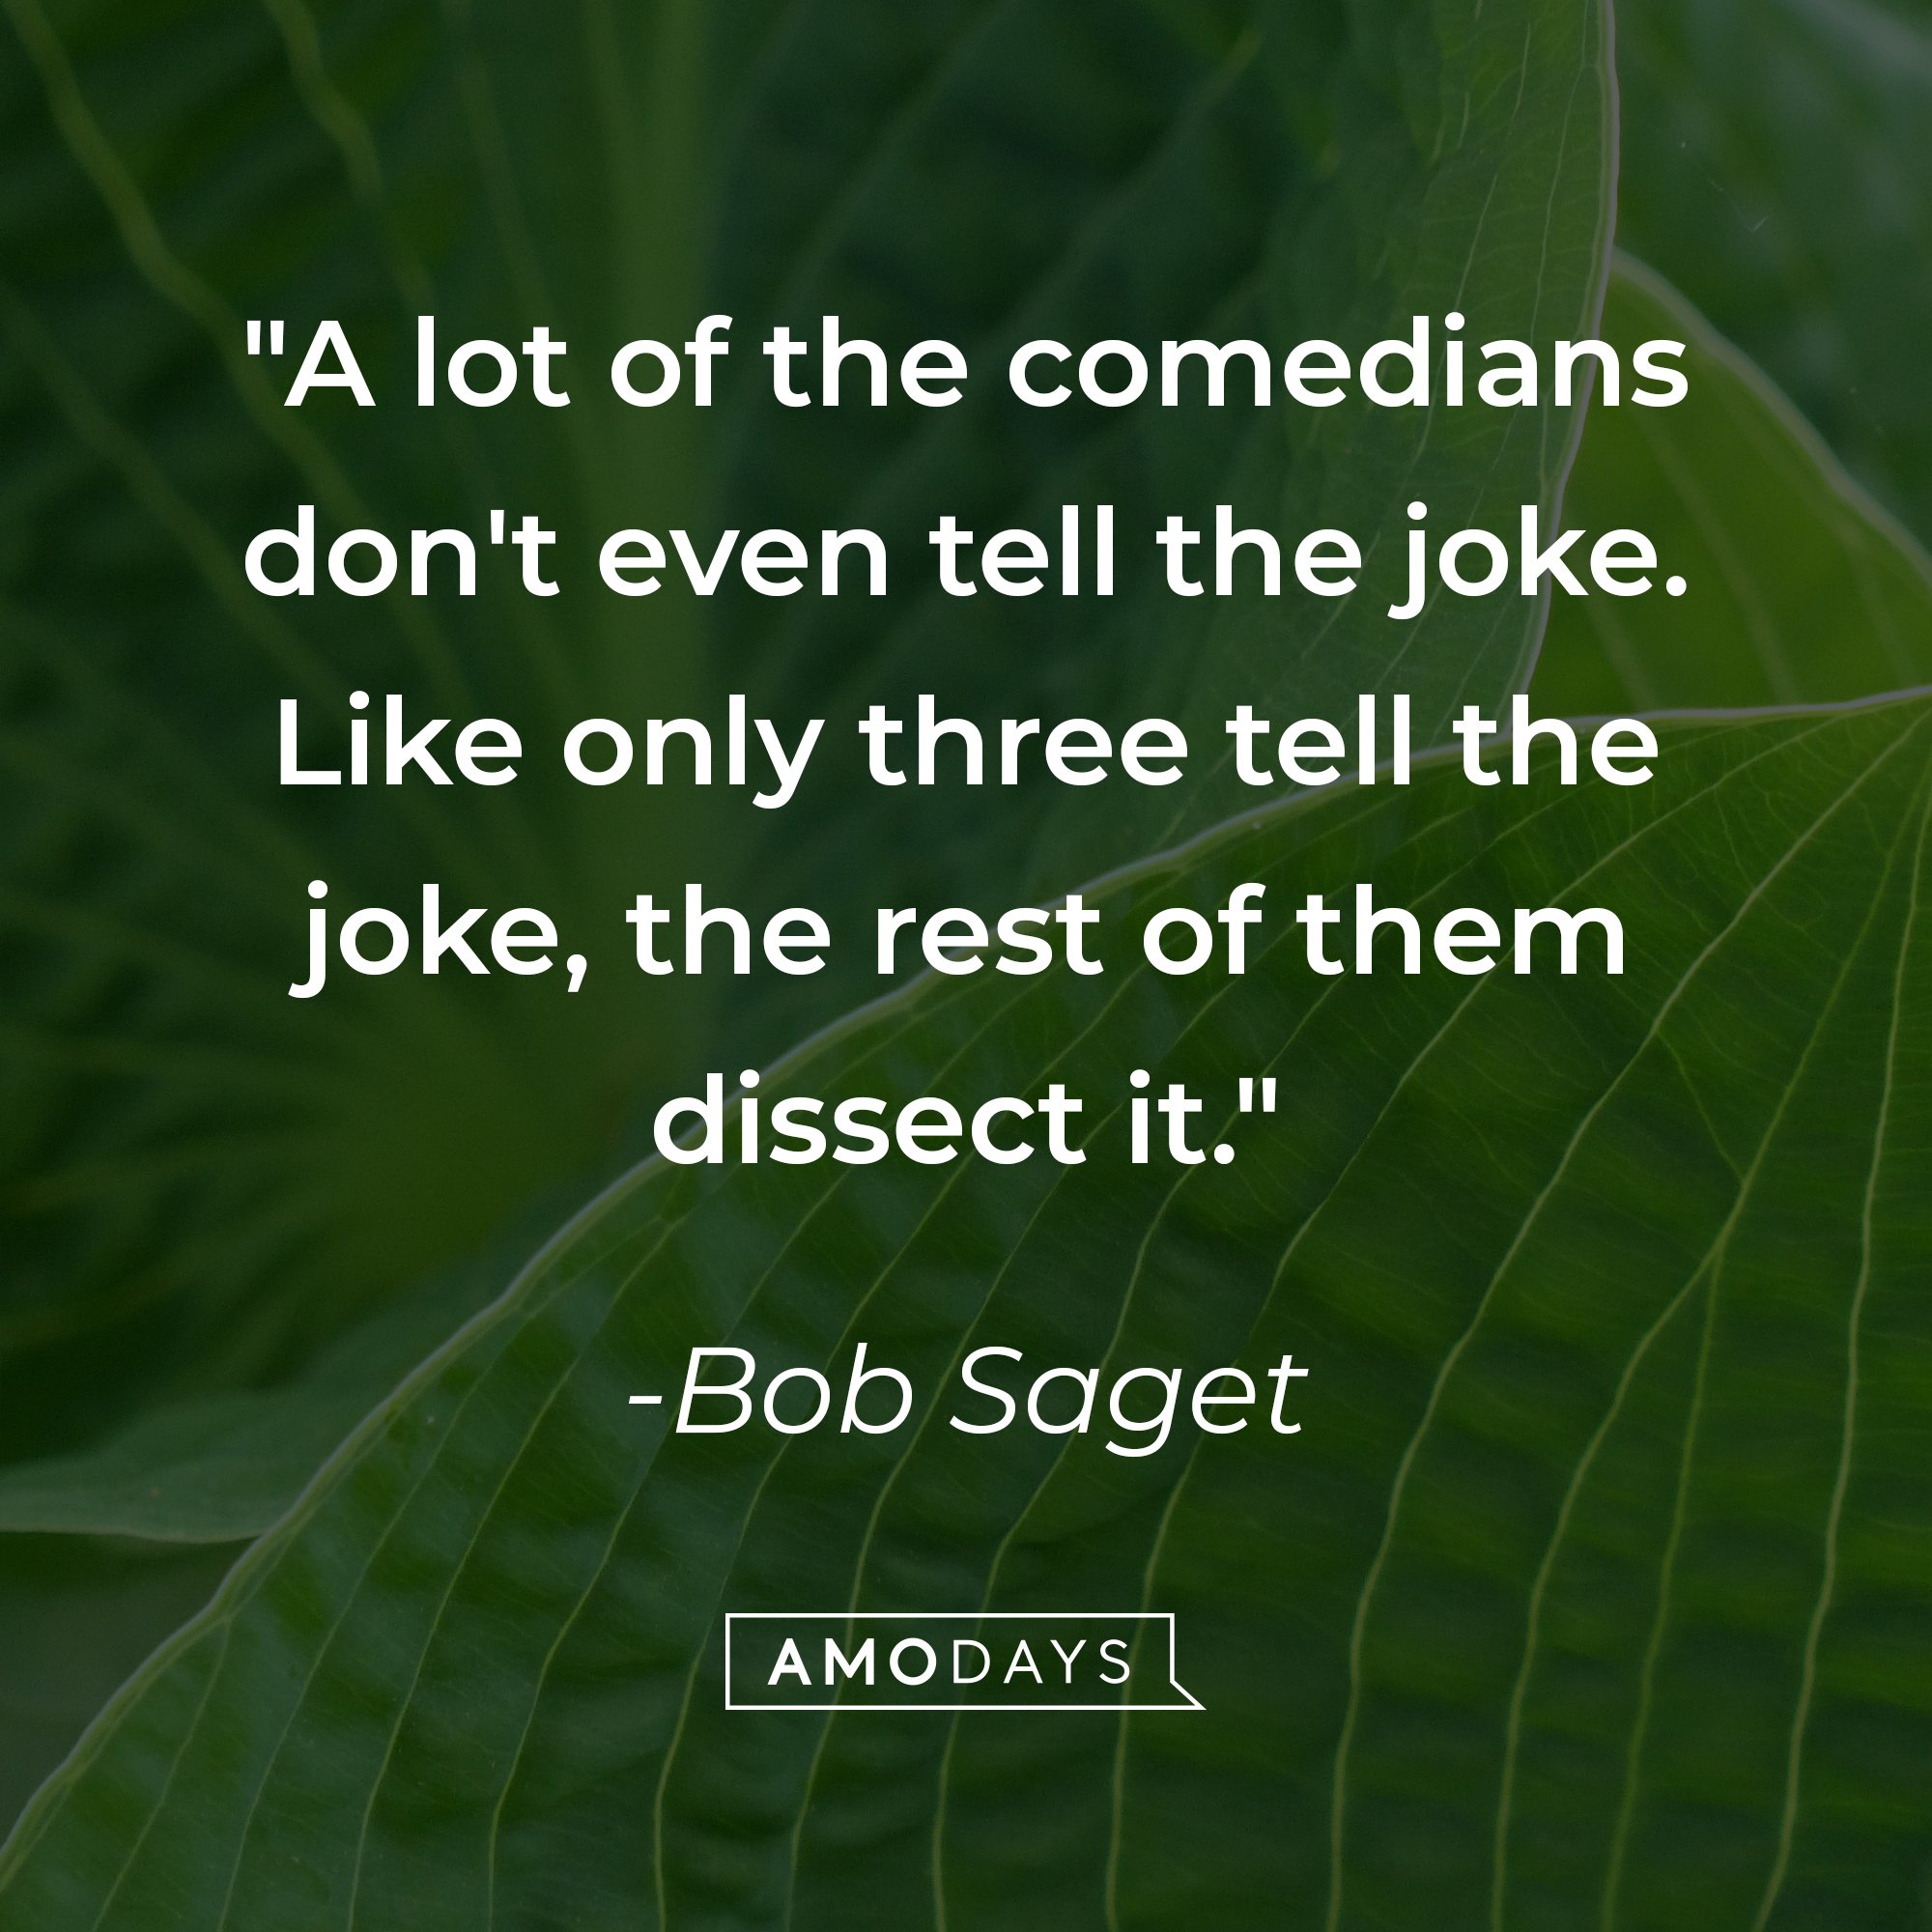  Bob Saget’s quote: "A lot of the comedians don't even tell the joke. Like only three tell the joke, the rest of them dissect it." | Image: AmoDays